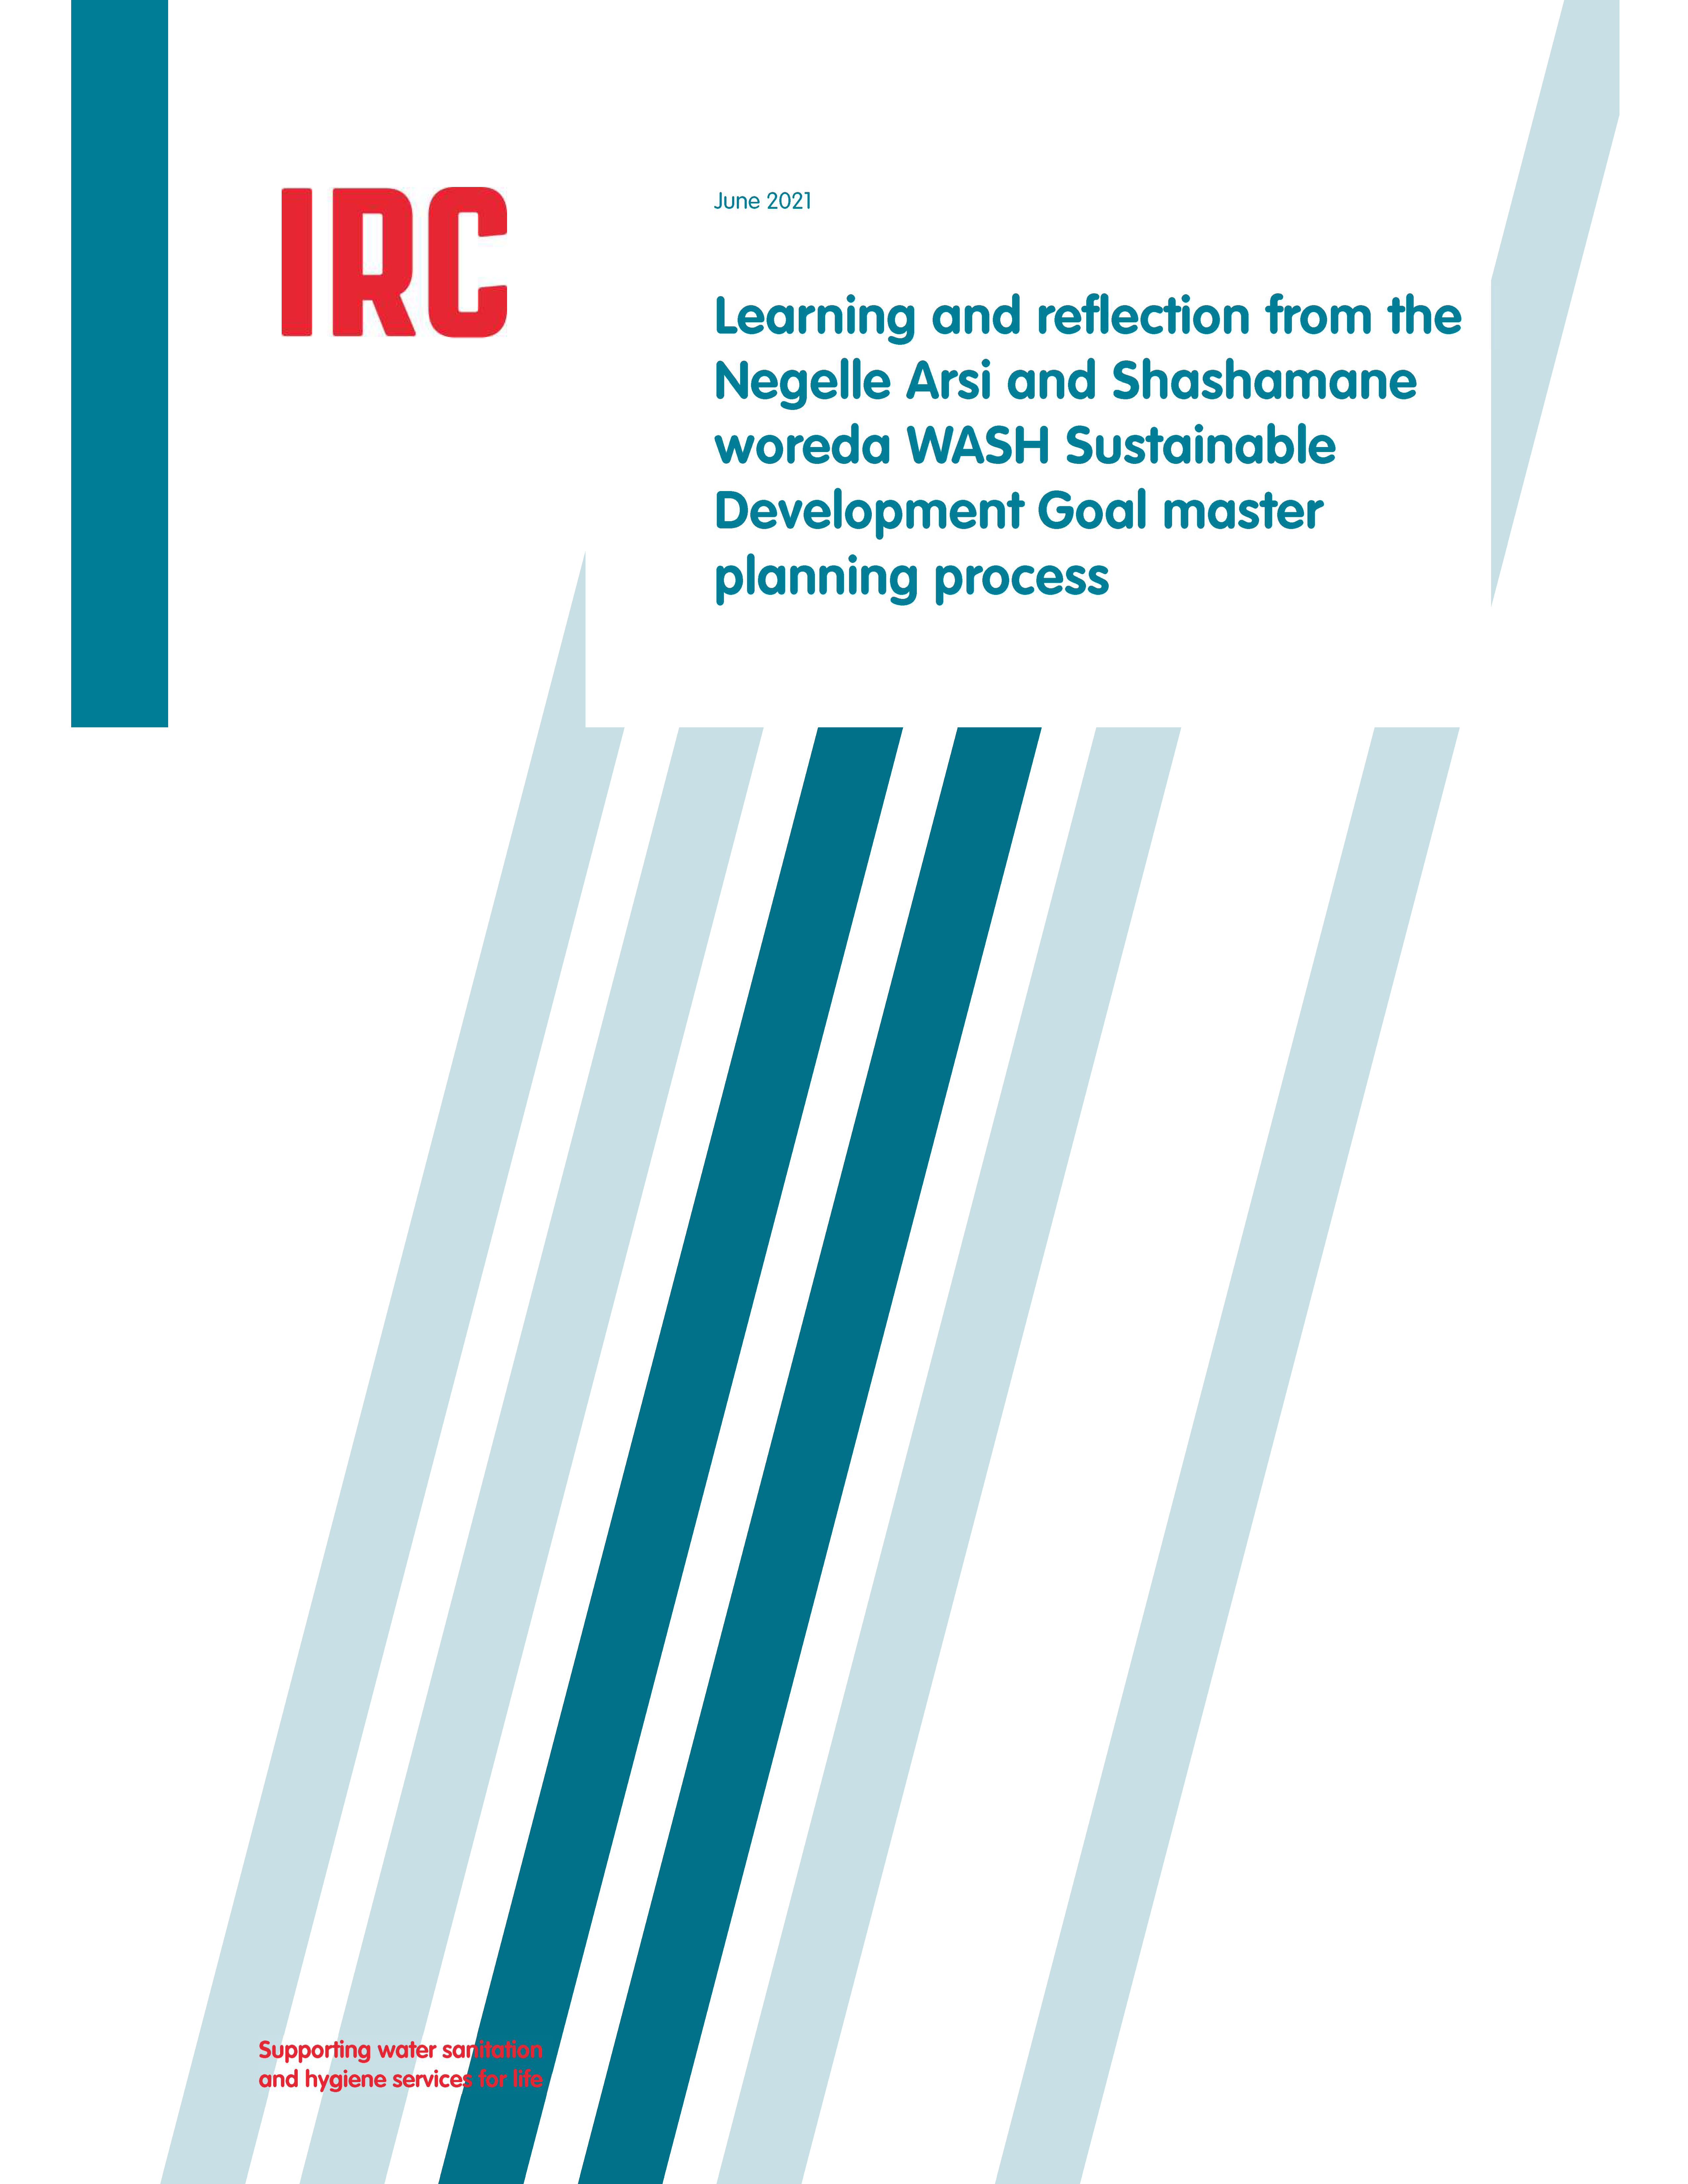 Learning paper cover page. The page has six teal stripes running diagonally across the page. At the top is the IRC logo and the title of the report.